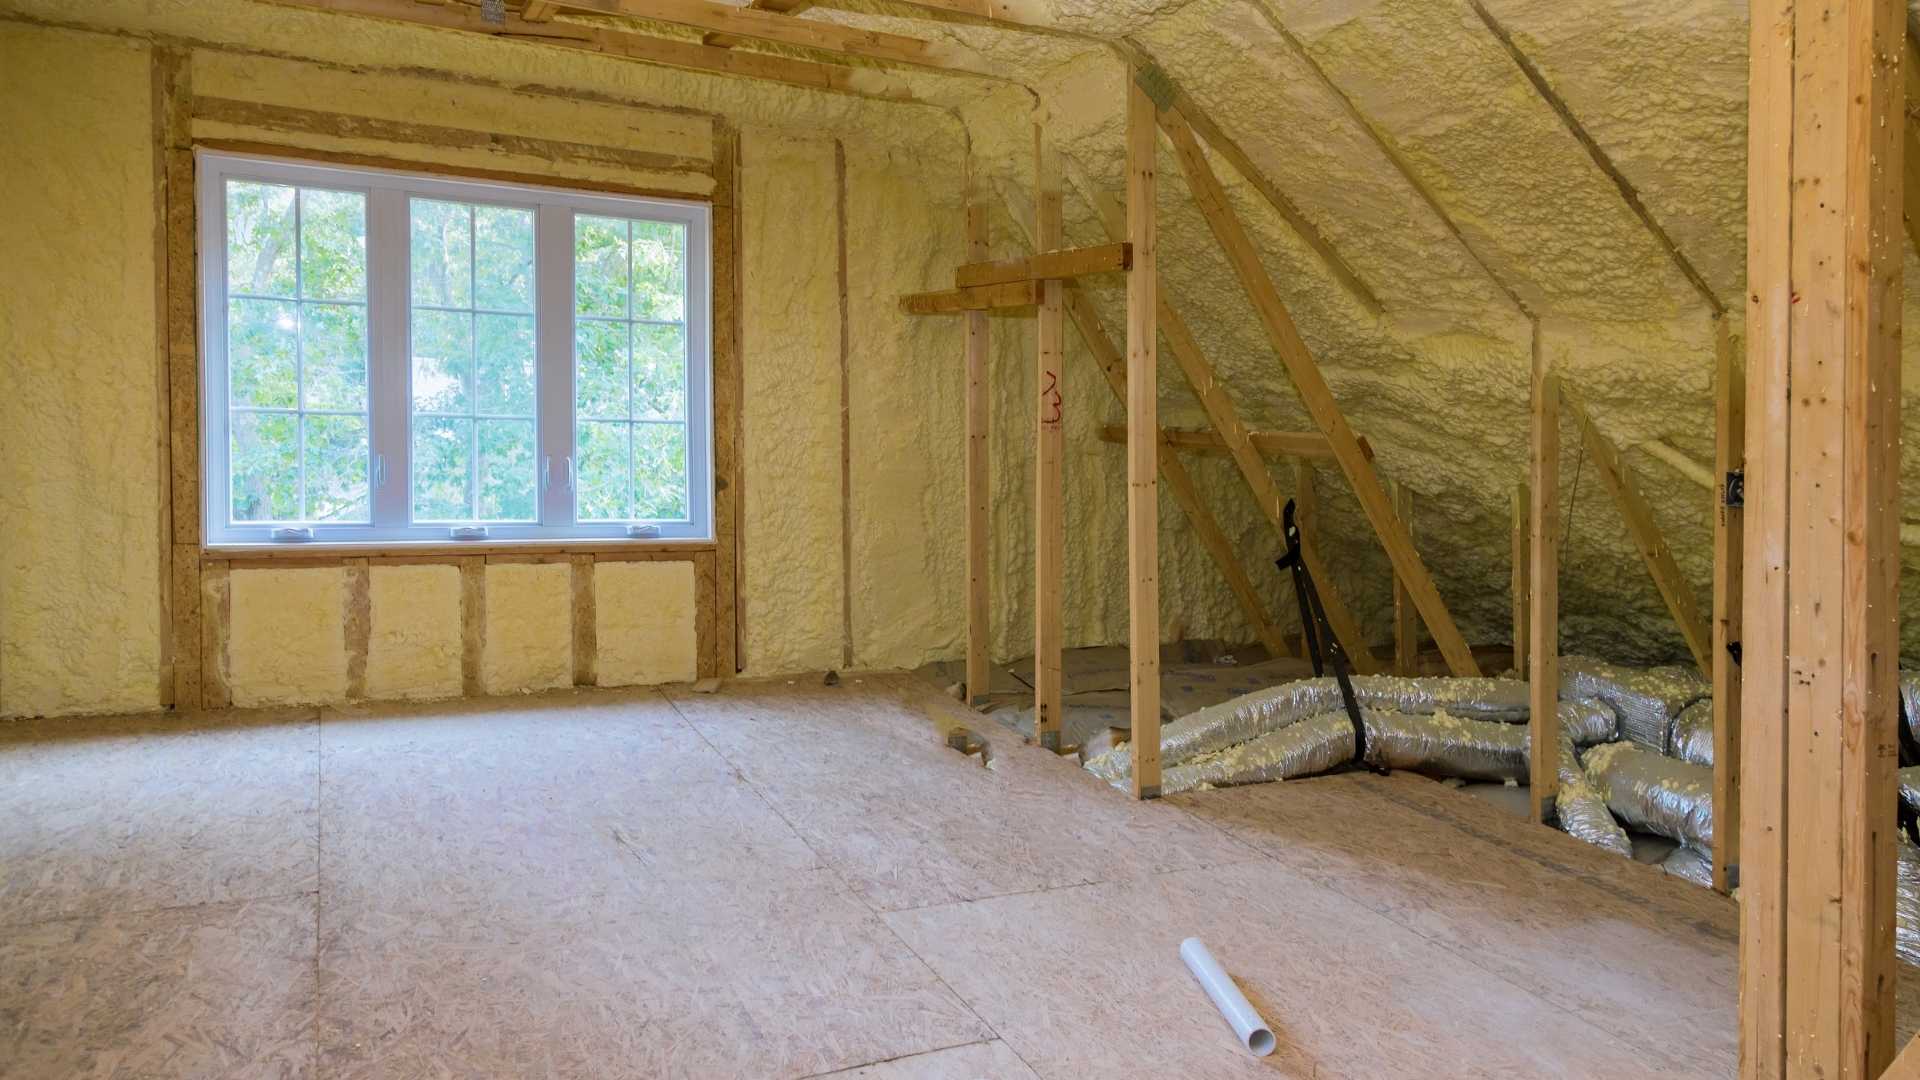 Where To Buy Soundproofing Foam In Charlotte Nc